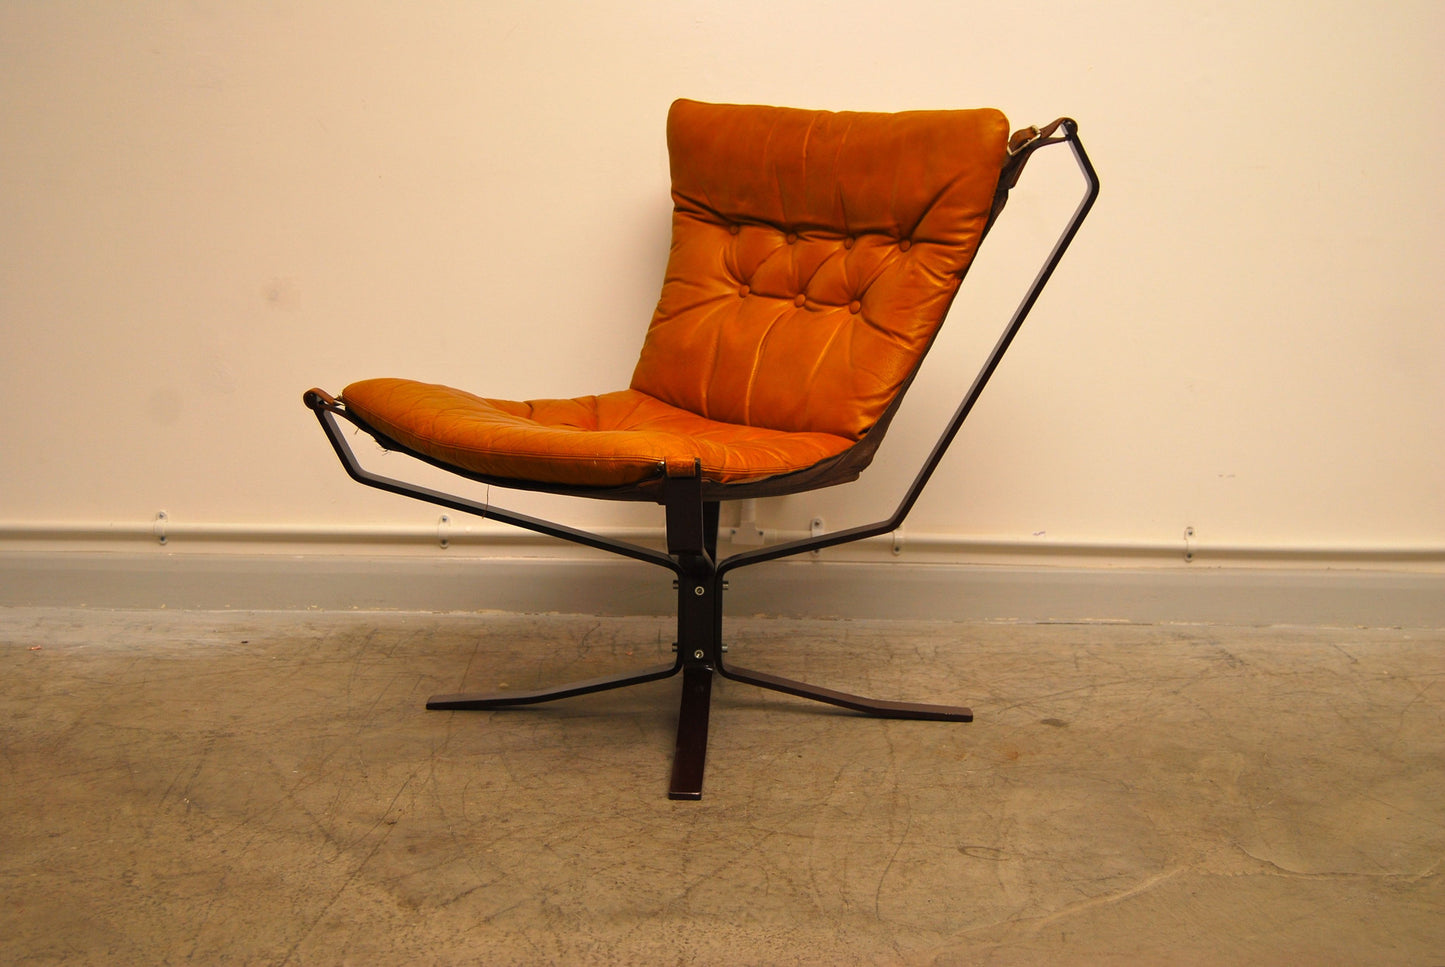 Falcon chair with steel frame